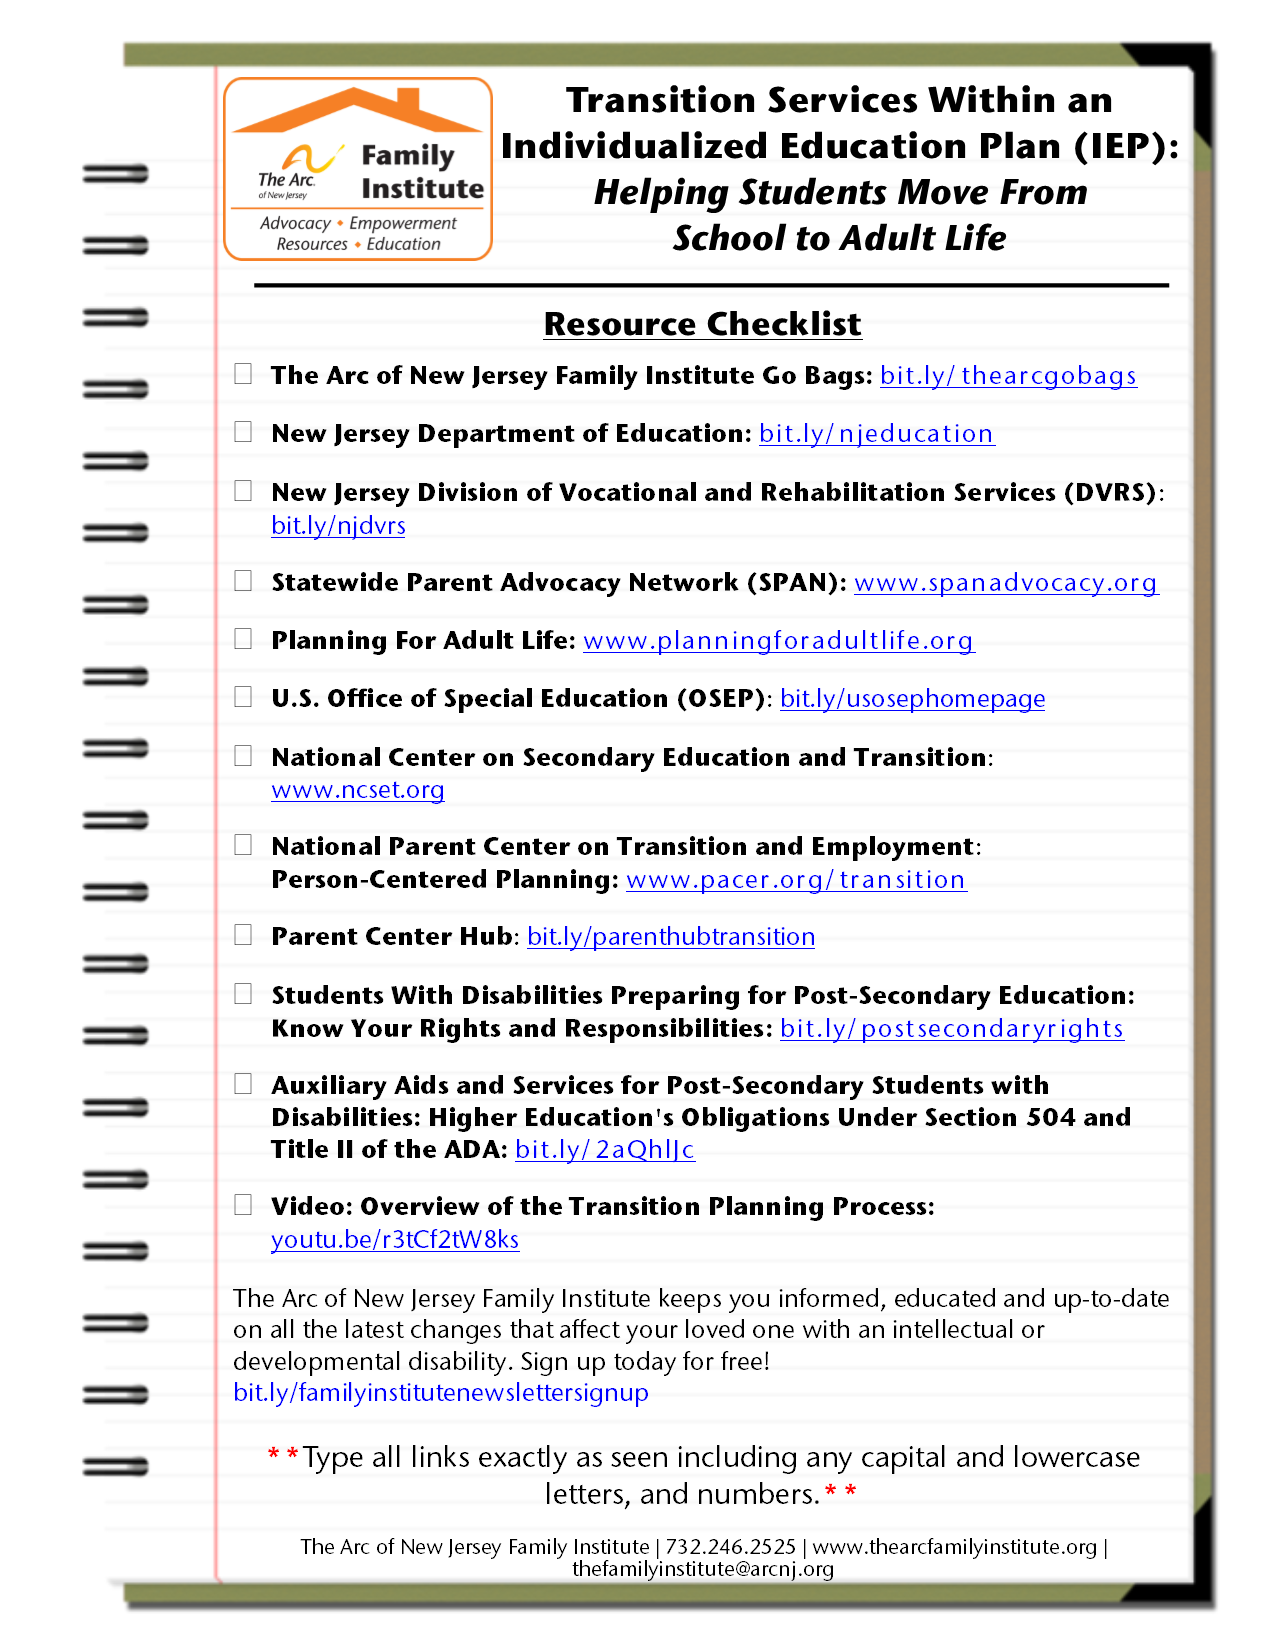 Transition Services Within an Individualized Education Plan: Helping Students Move From School to Adult Life - Checklist